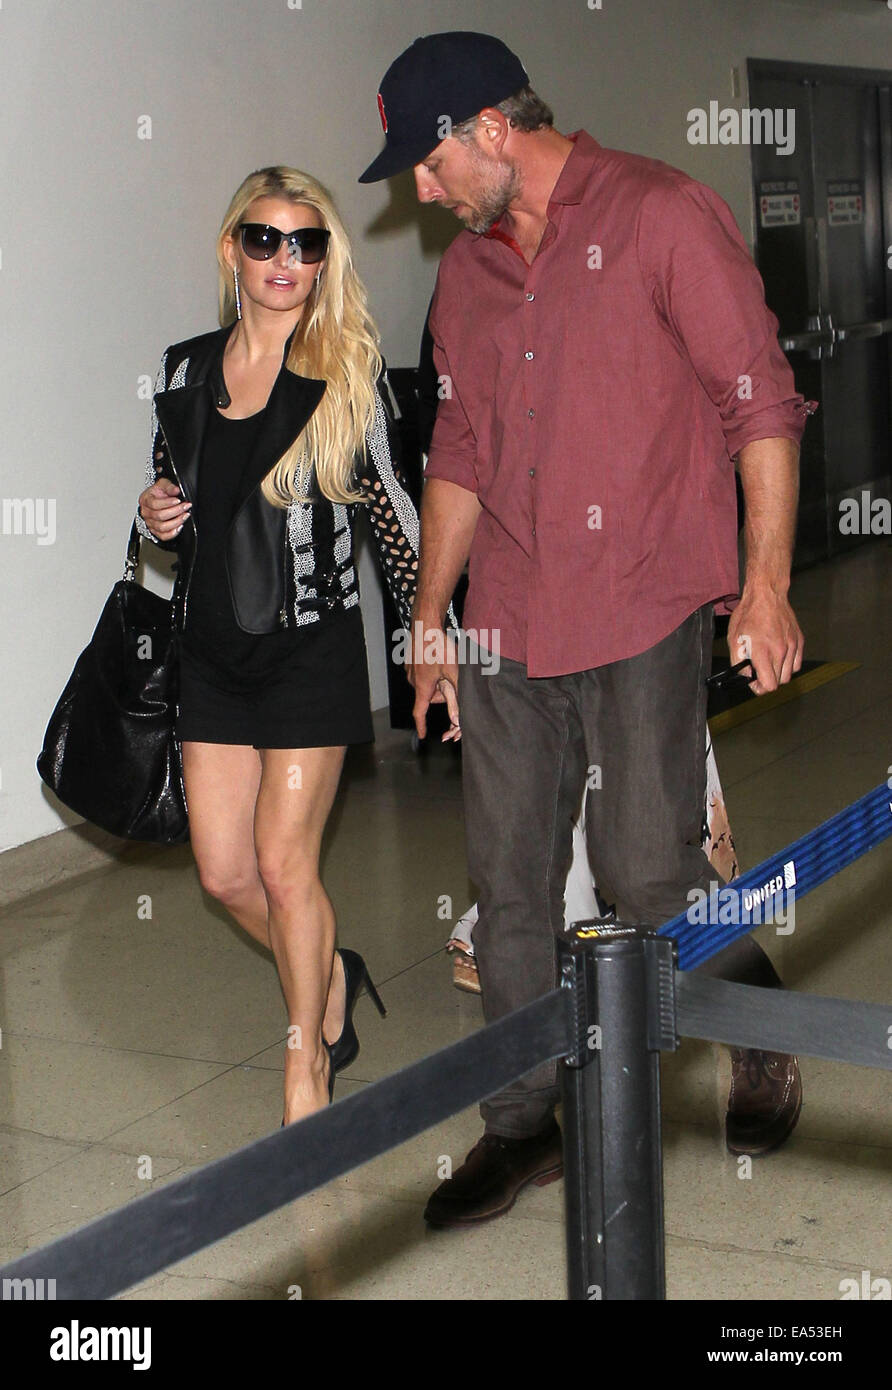 Jessica Simpson in short black skirt and leather jacket, arrives at Los Angeles International Airport (LAX) holding hands with with partner Eric Johnson  Featuring: Jessica Simpson,Eric Johnson Where: Los Angeles, California, United States When: 04 May 20 Stock Photo